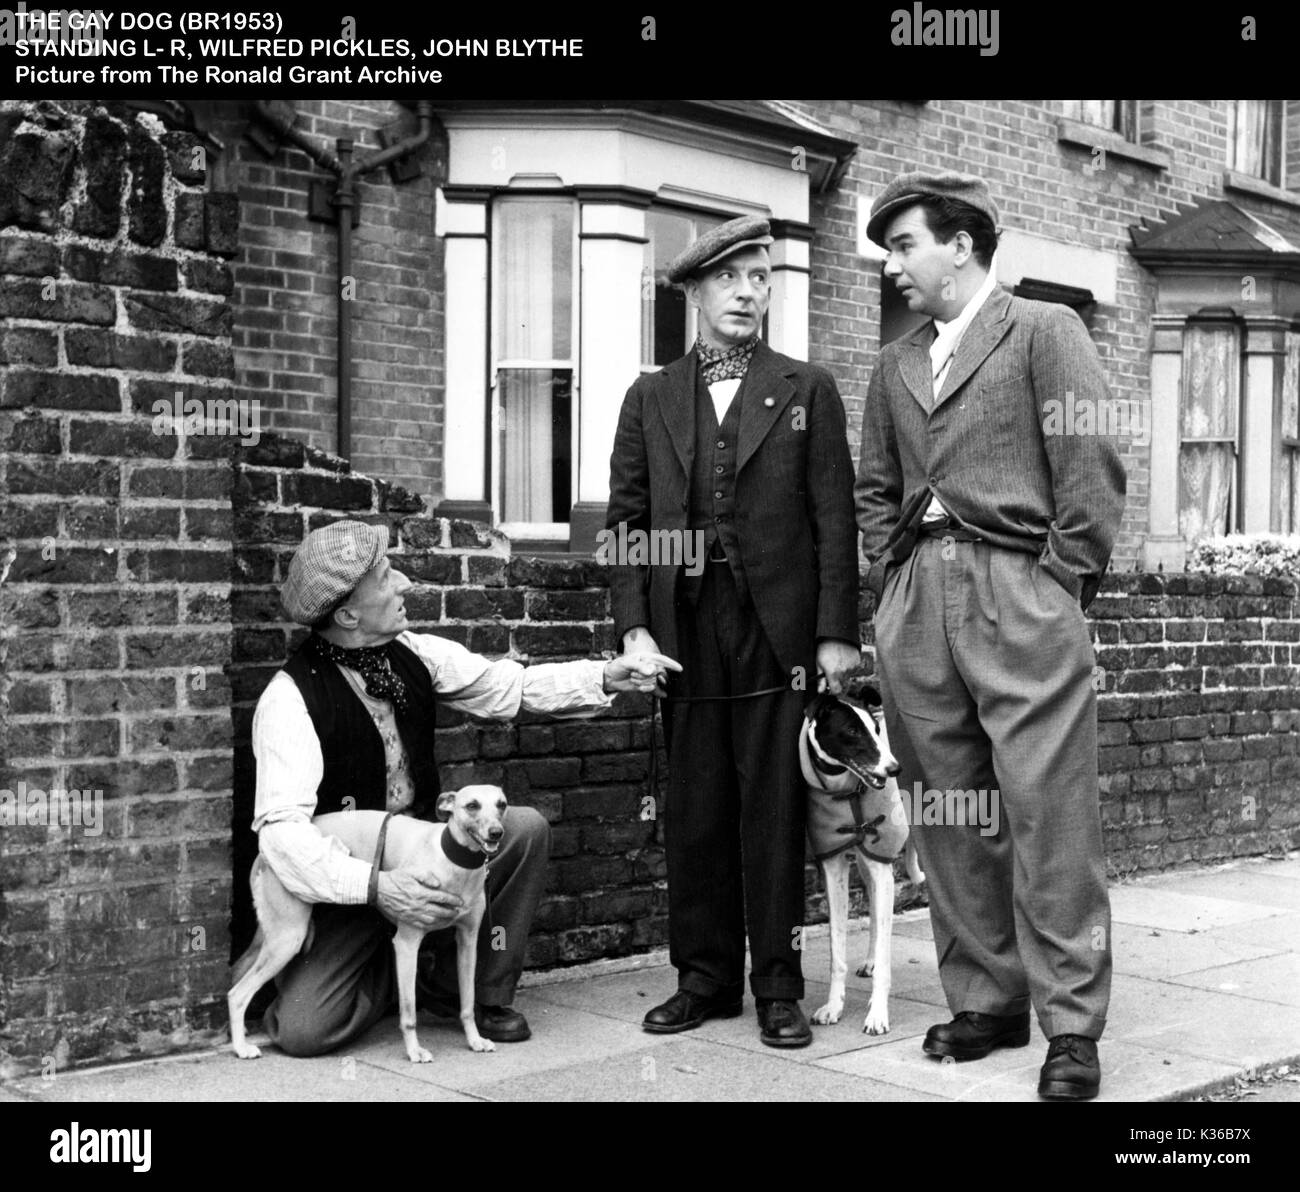 THE GAY DOG L-R, WILFRED PICKLES, JOHN BLYTHE Stock Photo